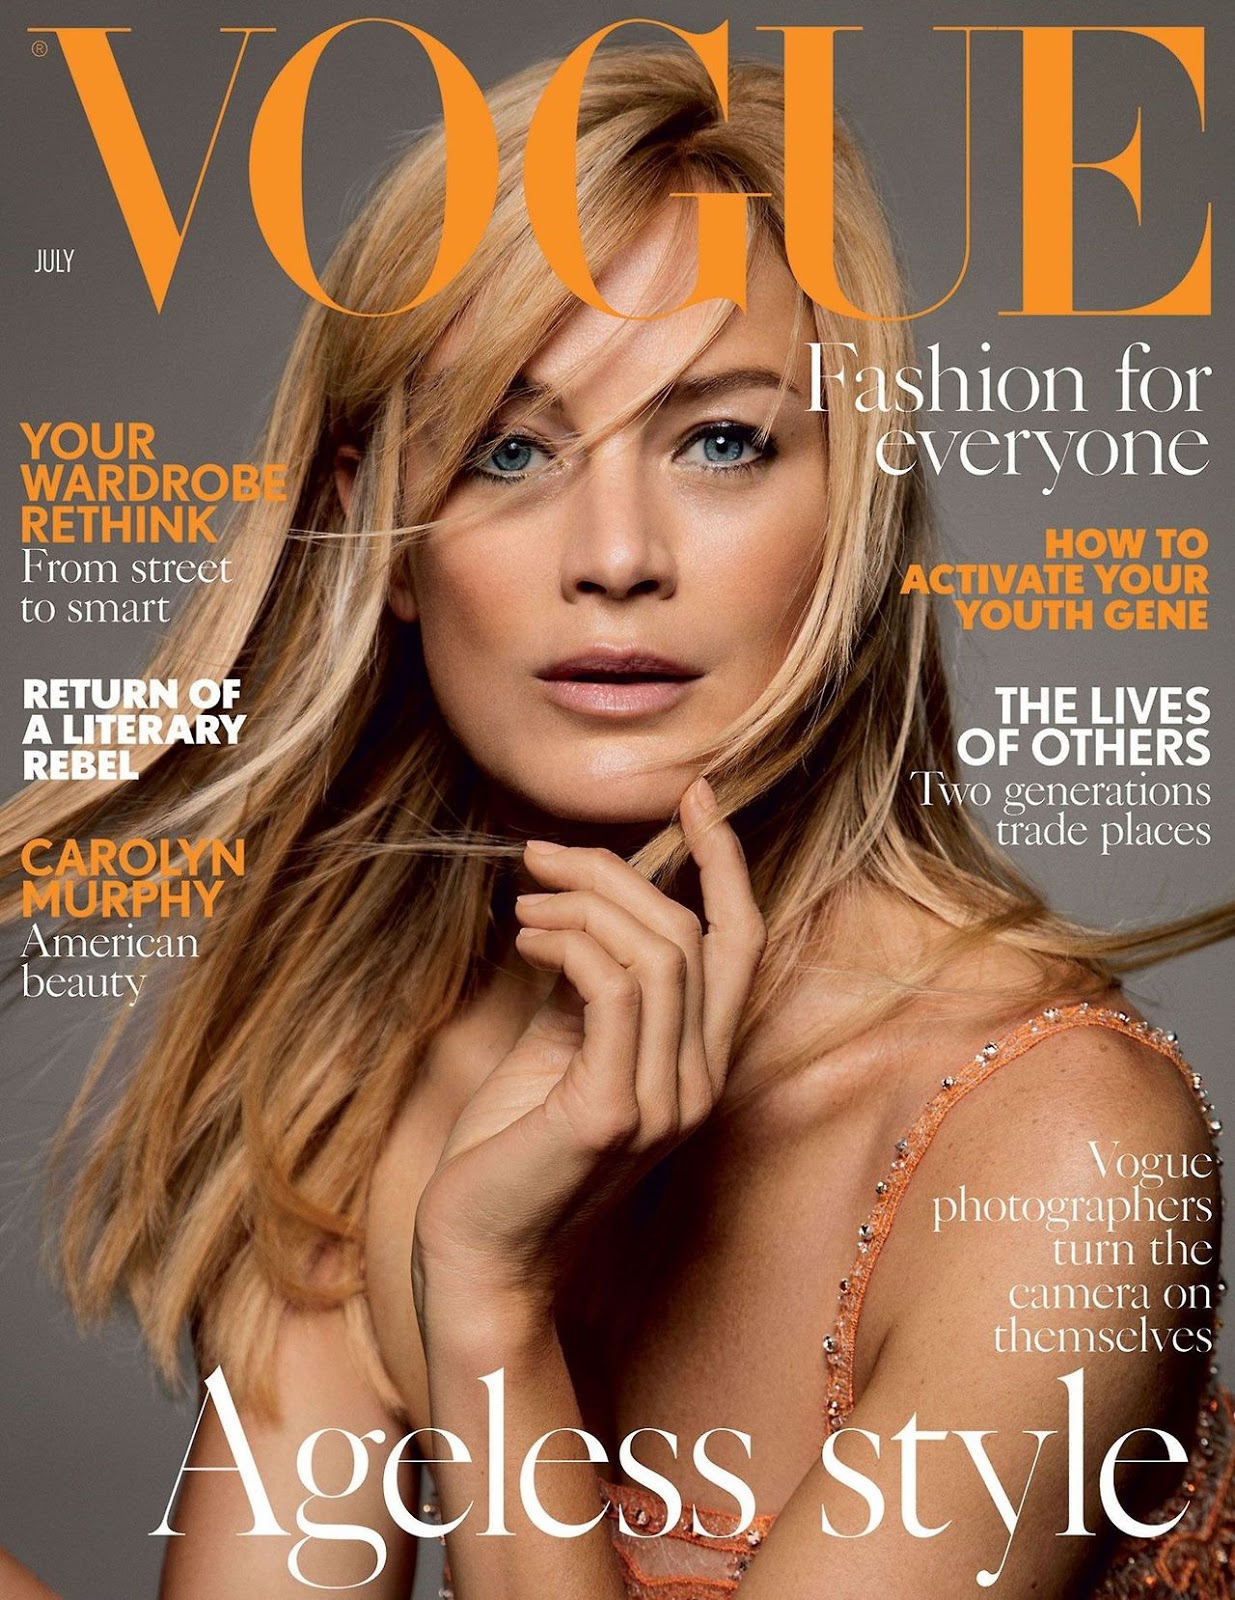 Vogue - Voice of a Century - Limited Edition Book